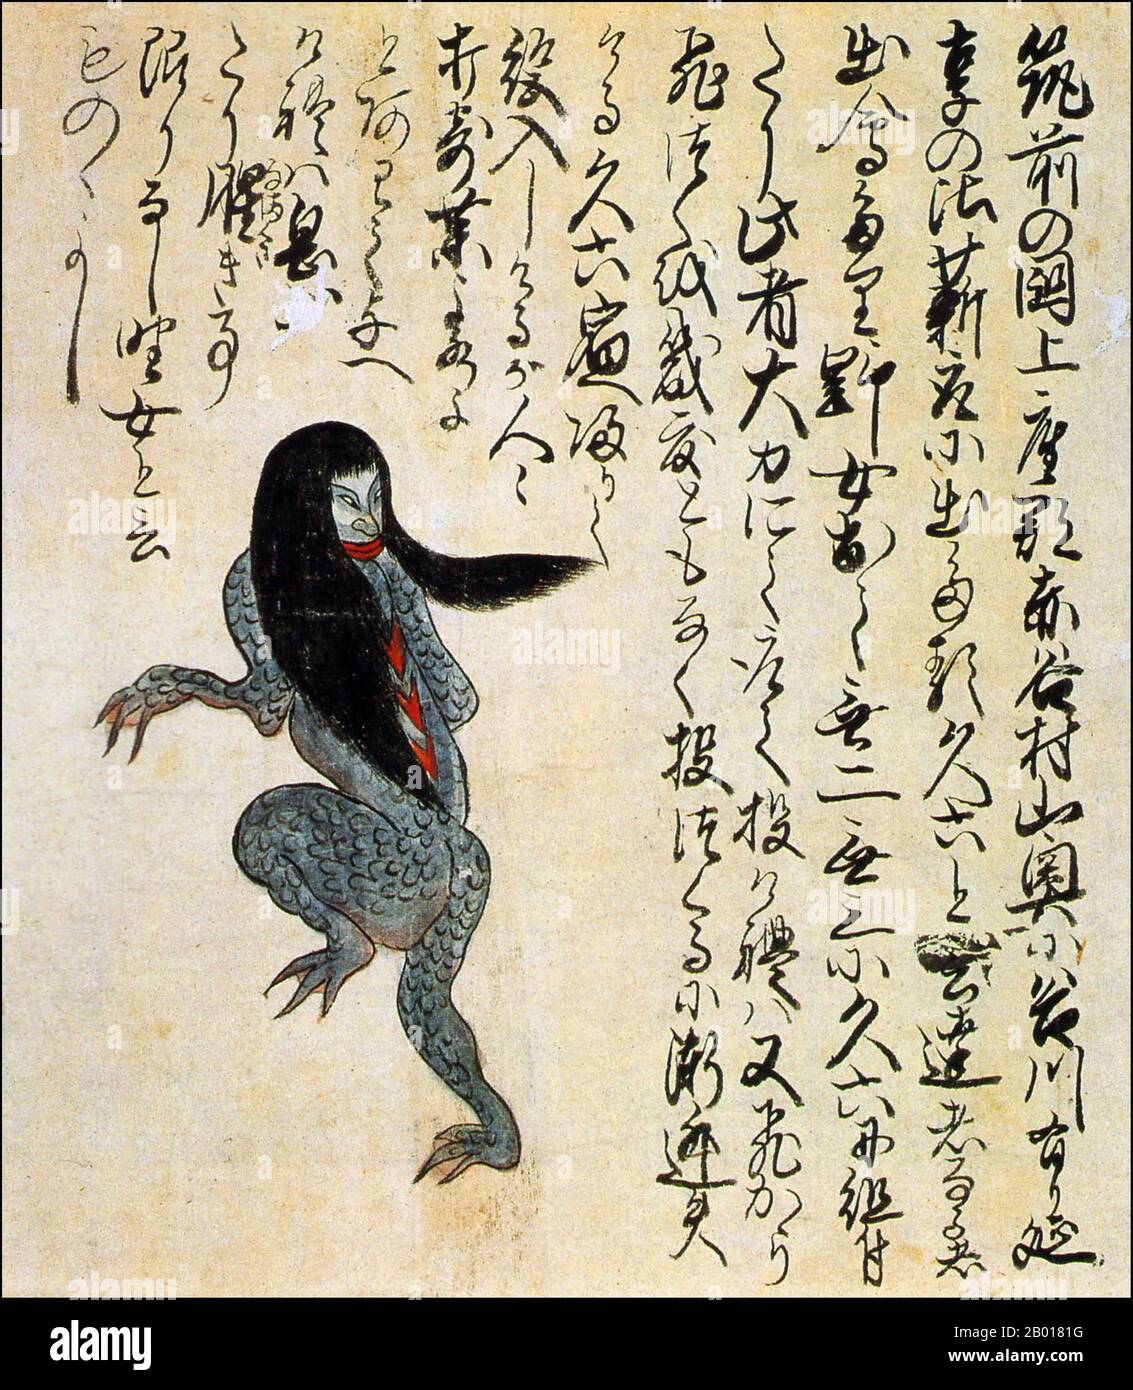 Japan: A 'wild woman' with scaly skin and webbed hands and feet. From the Kaikidan Ekotoba Monster Scroll, mid-19th century.  The 'wild woman' shown here appears to be an aquatic humanoid with scaly skin, webbed hands and feet (each with three fingers and toes), long black hair, and a large red mouth. People claim to have encountered the creature in the 1750s in mountain streams in the Asakura area of Fukuoka prefecture.  The Kaikidan Ekotoba is a mid-19th century handscroll that profiles 33 legendary monsters and human oddities, mostly from the Kyushu region of Japan. Stock Photo